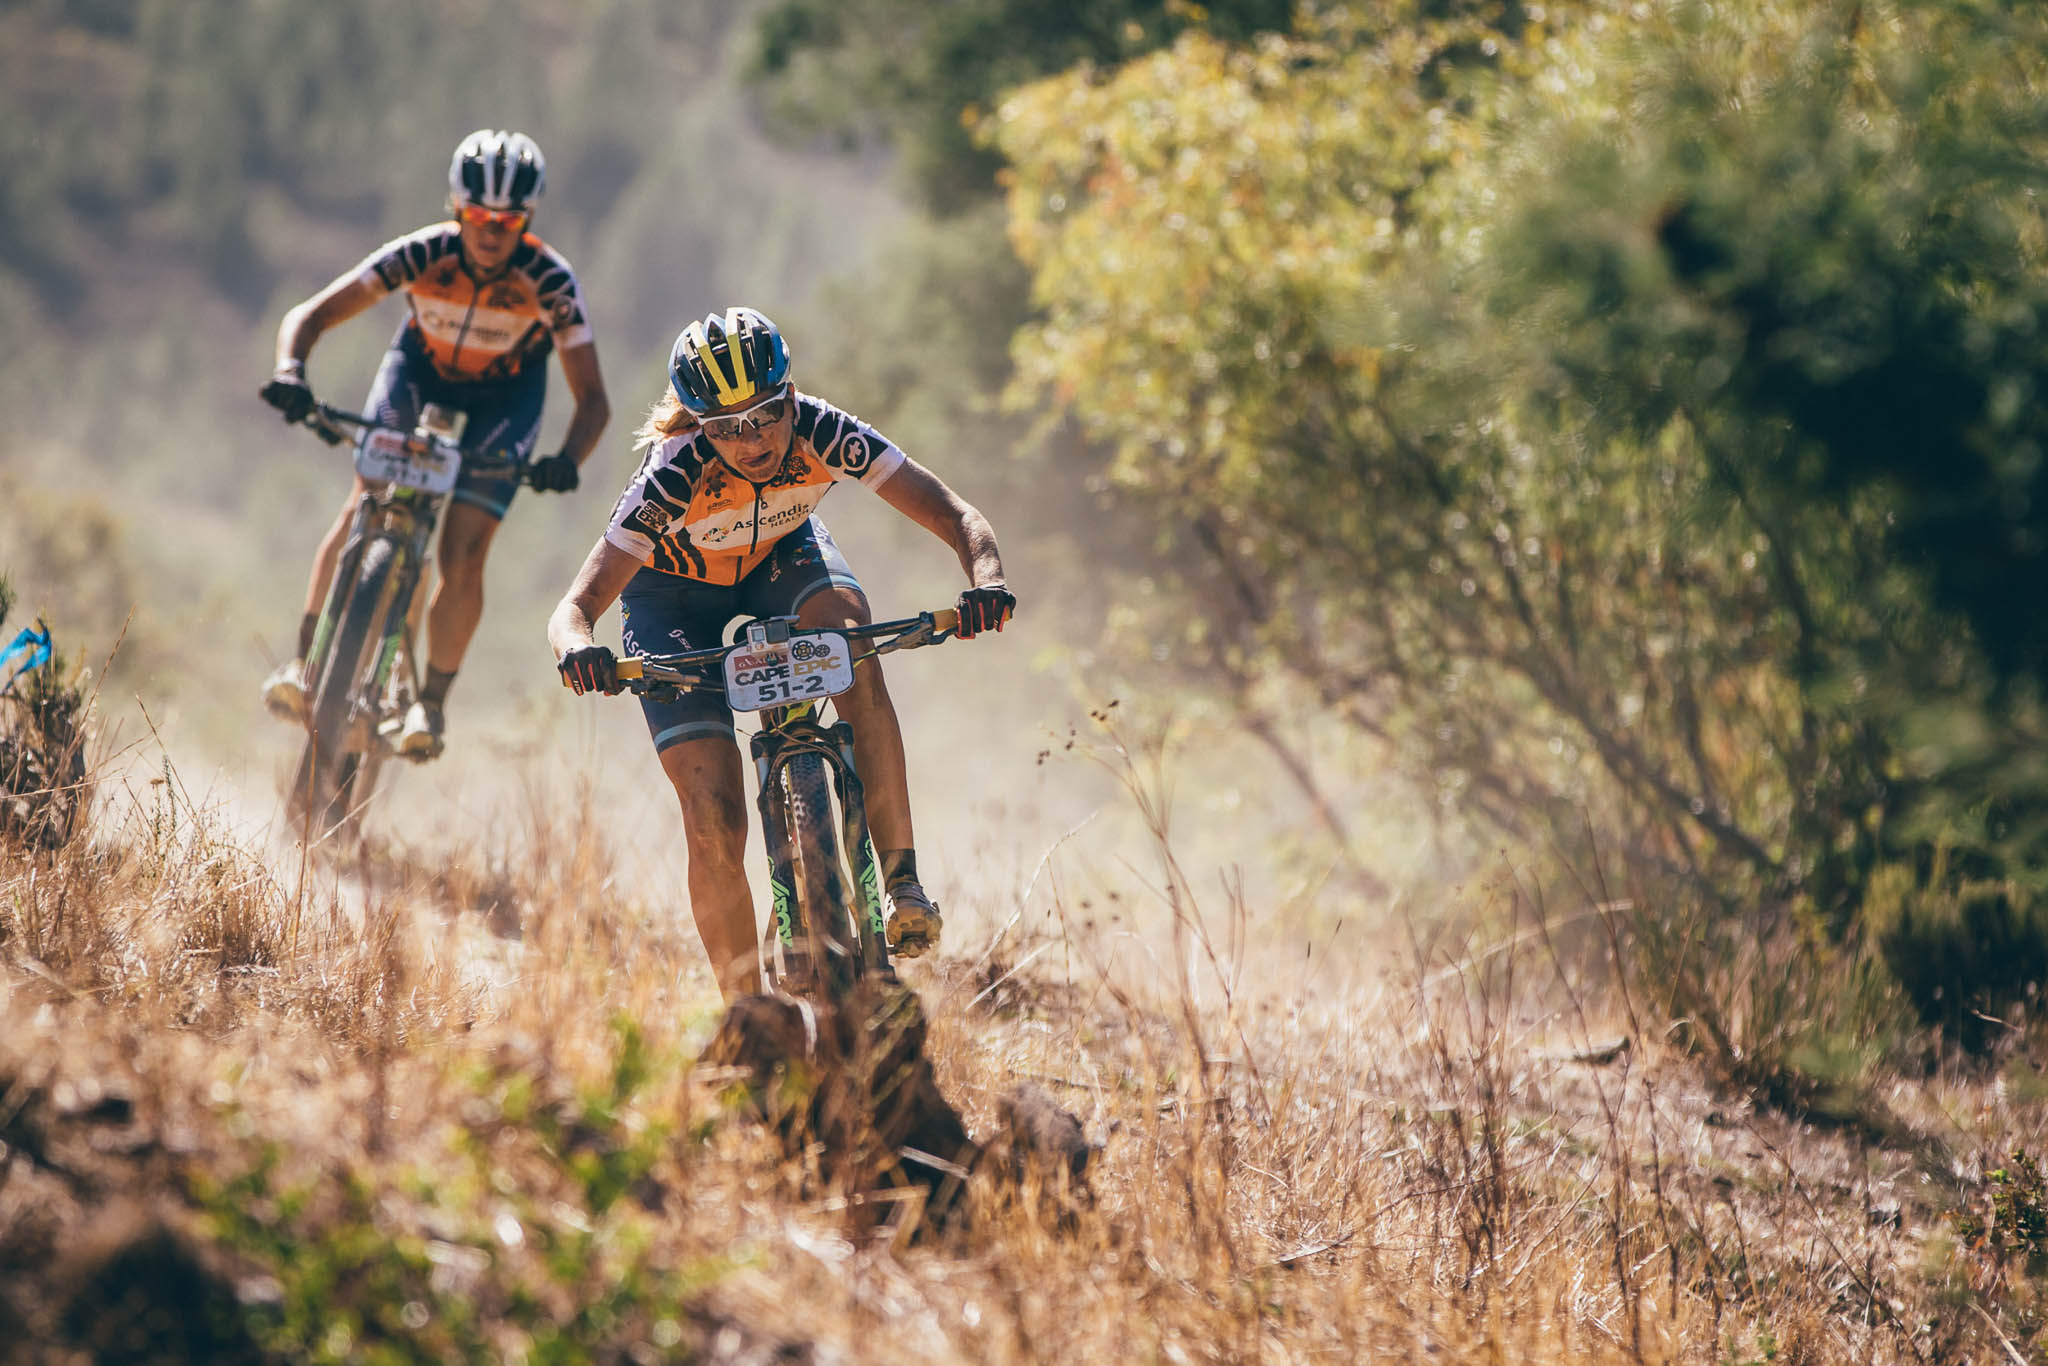 Leading womens team Ascendis Health's Robyn de Groot and Jennie Stenerhag on their way to victory during stage 1 of the 2016 Absa Cape Epic Mountain Bike stage race held from Saronsberg Wine Estate in Tulbagh, South Africa on the 14th March 2016 Photo by Ewald Sadie/Cape Epic/SPORTZPICS PLEASE ENSURE THE APPROPRIATE CREDIT IS GIVEN TO THE PHOTOGRAPHER AND SPORTZPICS ALONG WITH THE ABSA CAPE EPIC ace2016